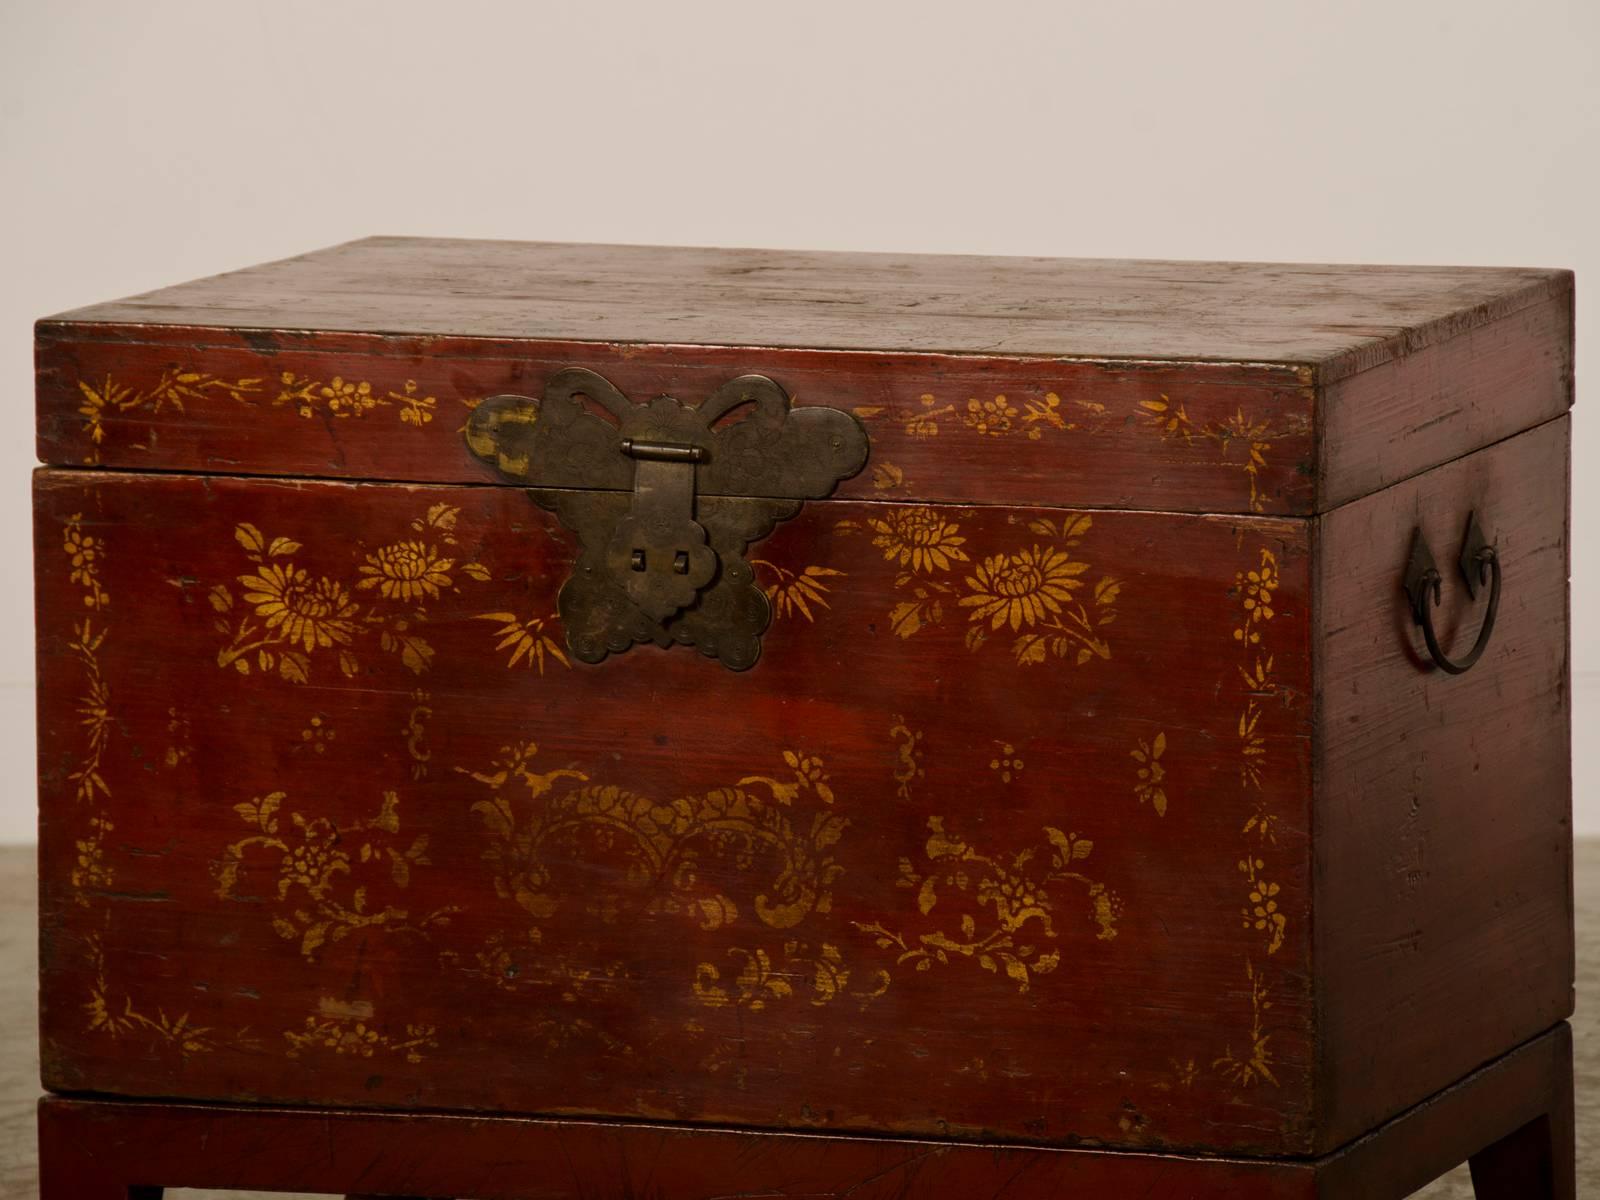 Receive our new selections direct from 1stdibs by email each week. Please click follow dealer below and see them first!

A red lacquer antique Chinese trunk with gold painted decoration from Kuang Hsu period circa 1875 now raised on a custom